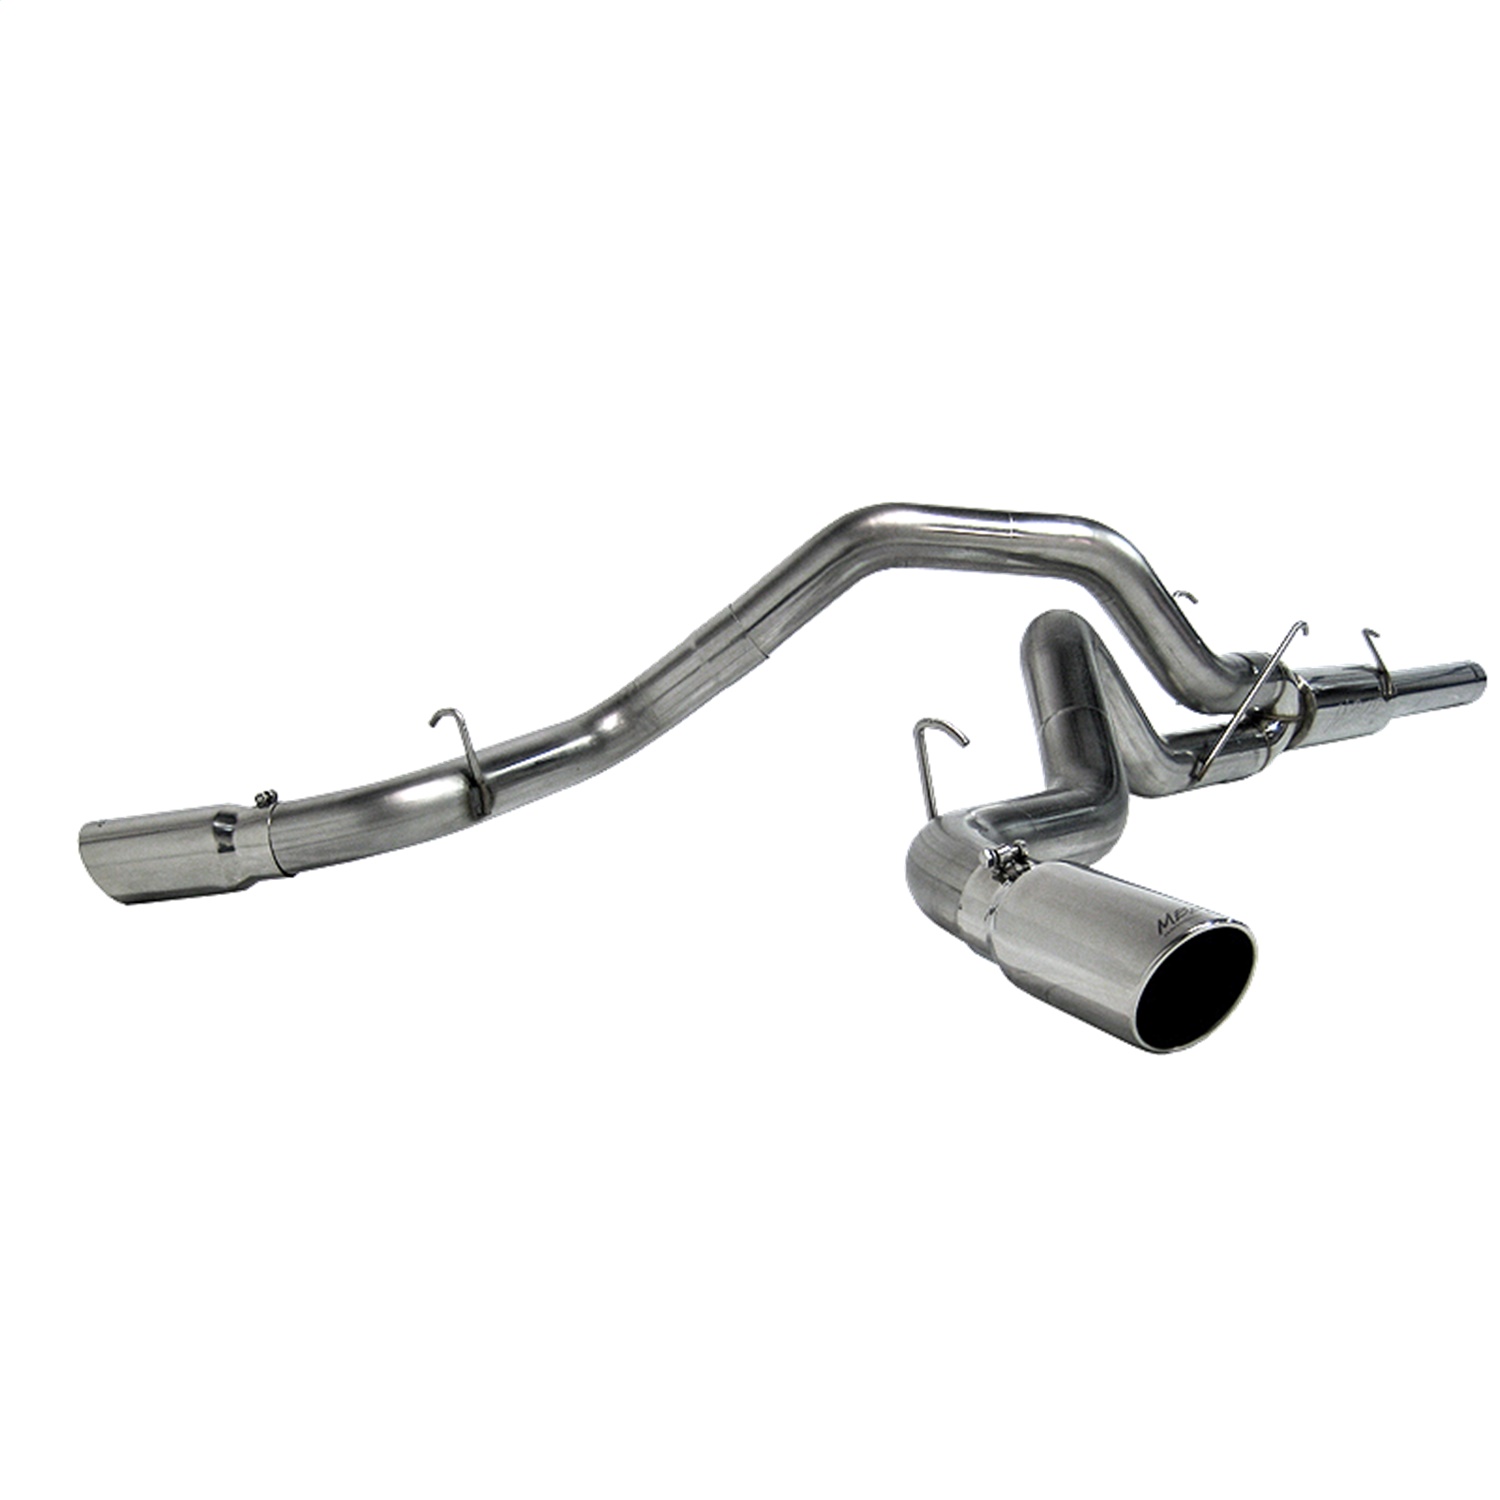 AutoPartsWAY.ca Canada 2005 Dodge Ram 2500 Exhaust System Kit in Canada